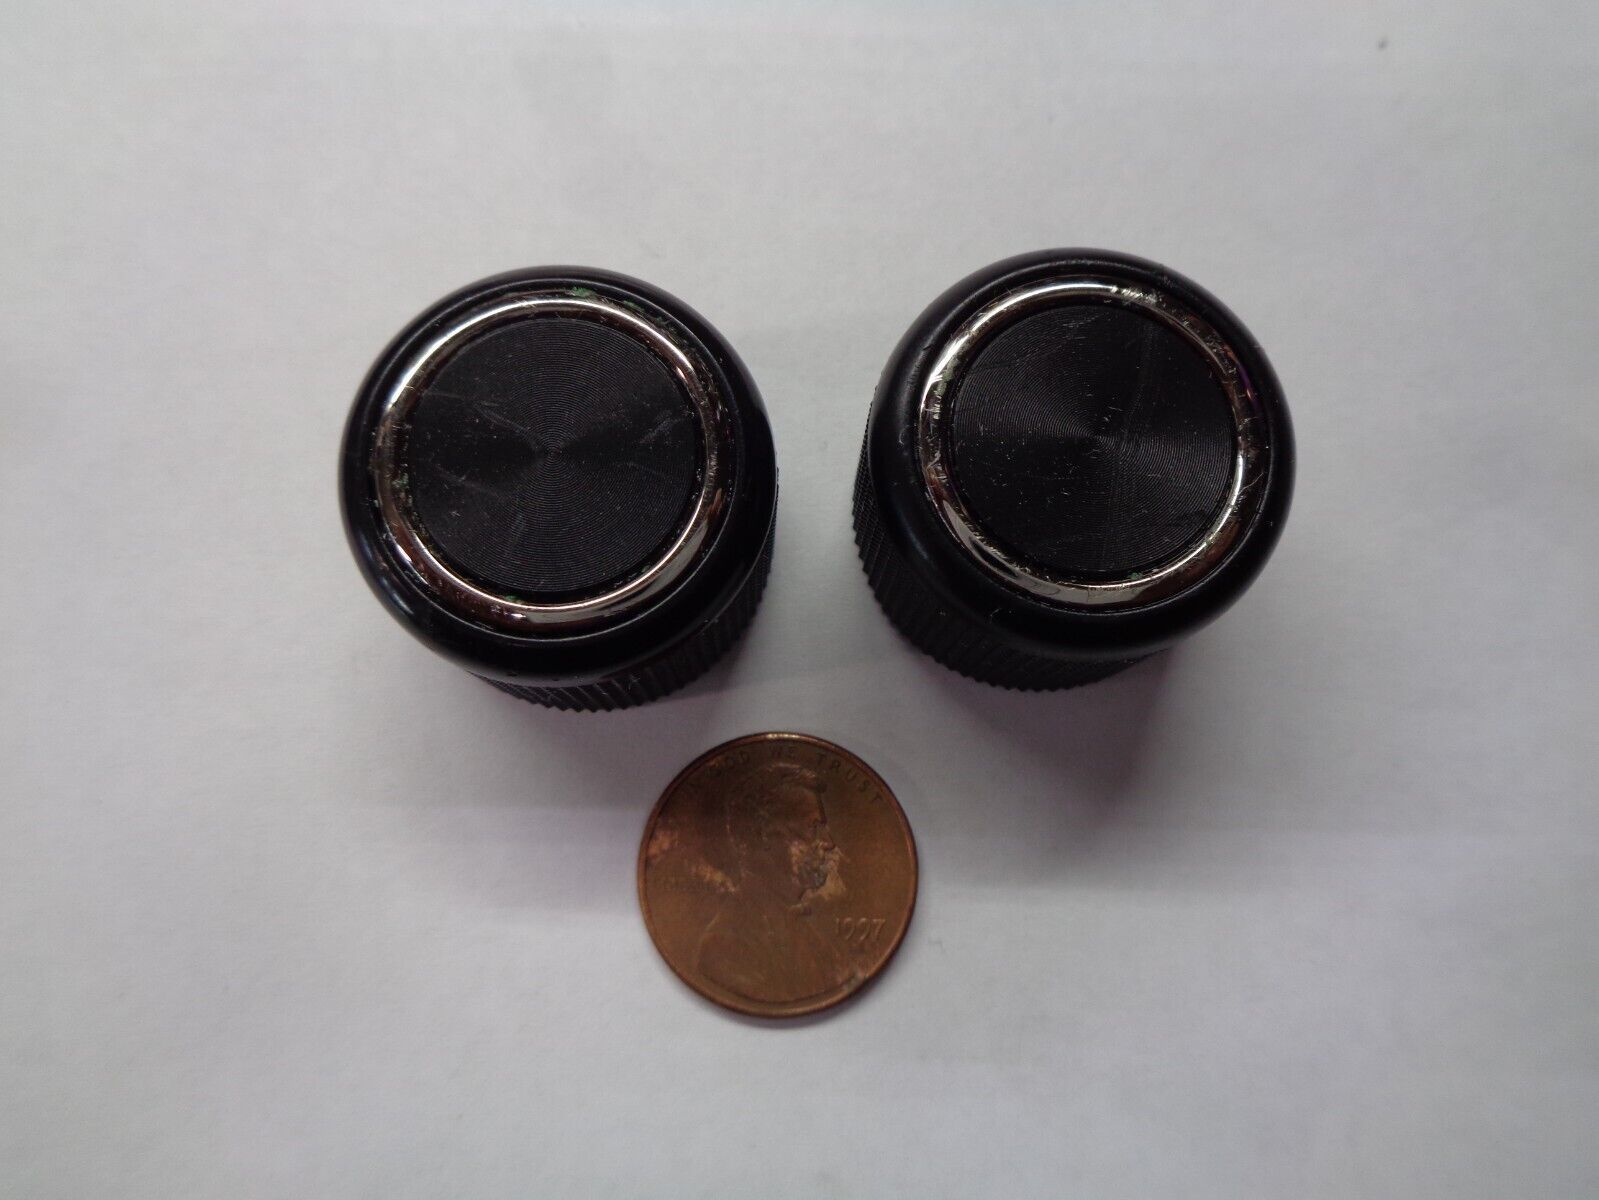 Primary image for 2015 AUDI  A3 RADIO STEREO TUNER CONTROL KNOB SET OEM FREE SHIPPING!